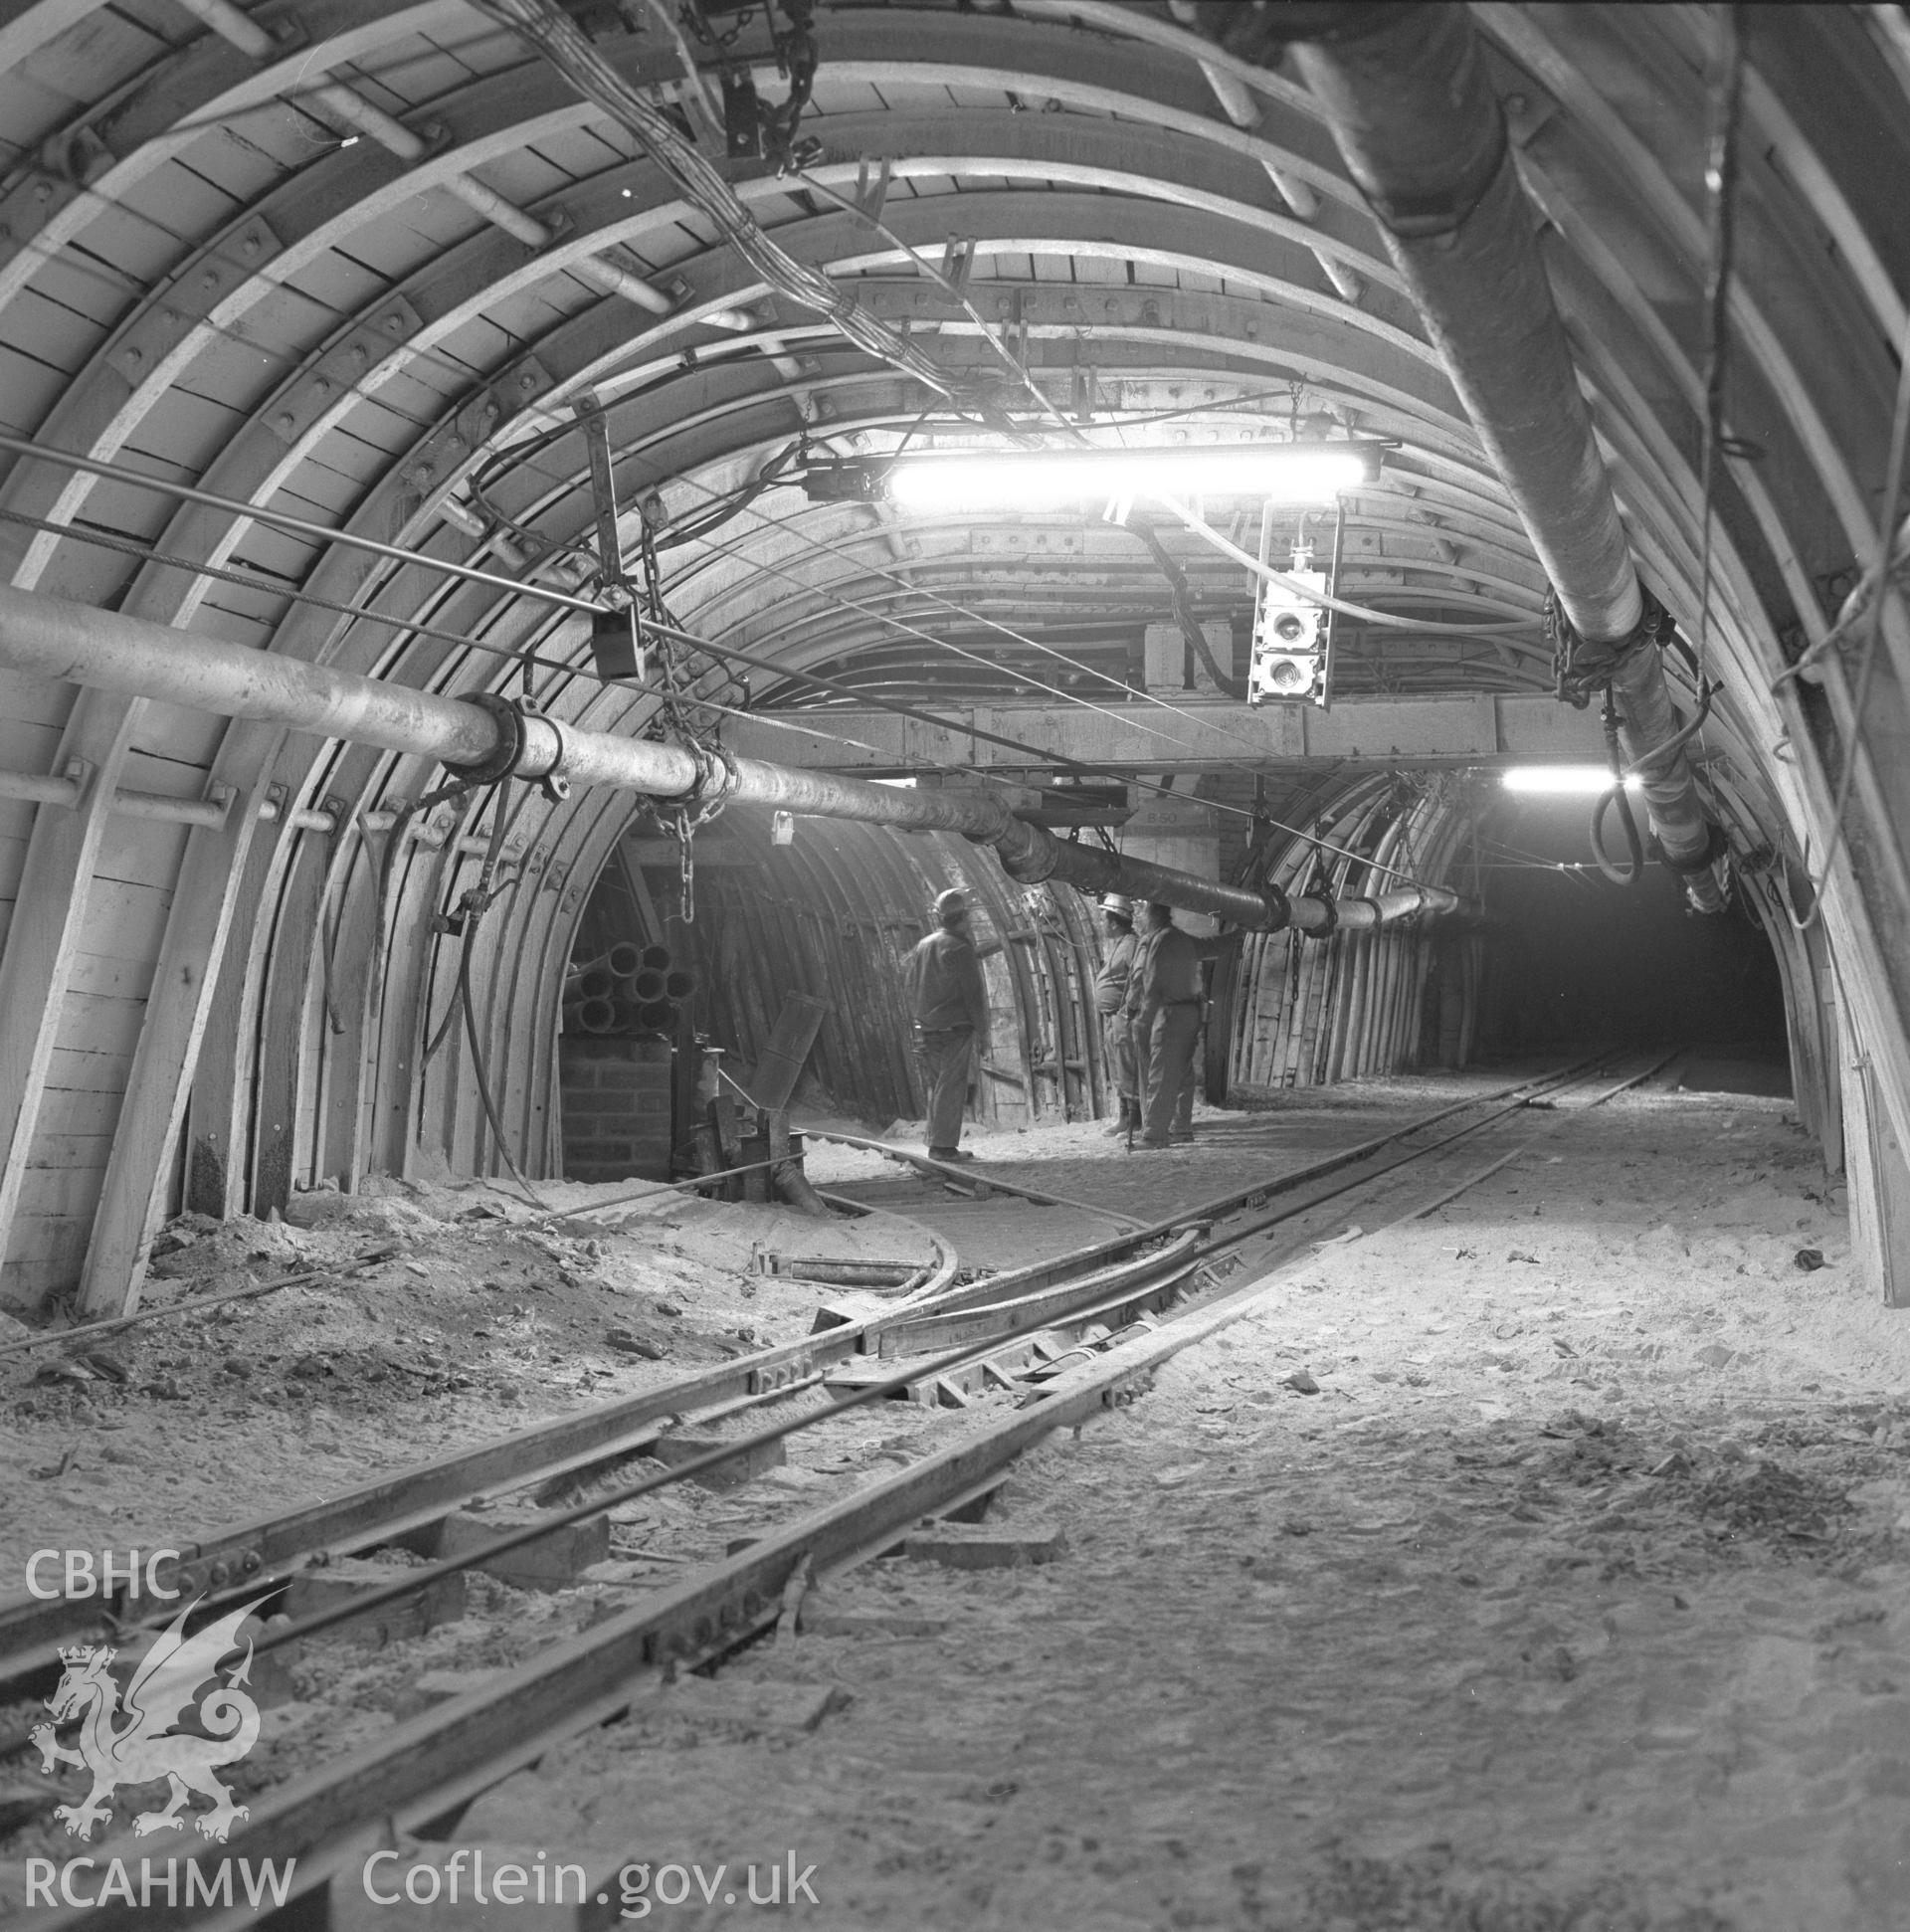 Digital copy of an acetate negative showing a new heading in a new district at Taff Colliery, from the John Cornwell Collection.